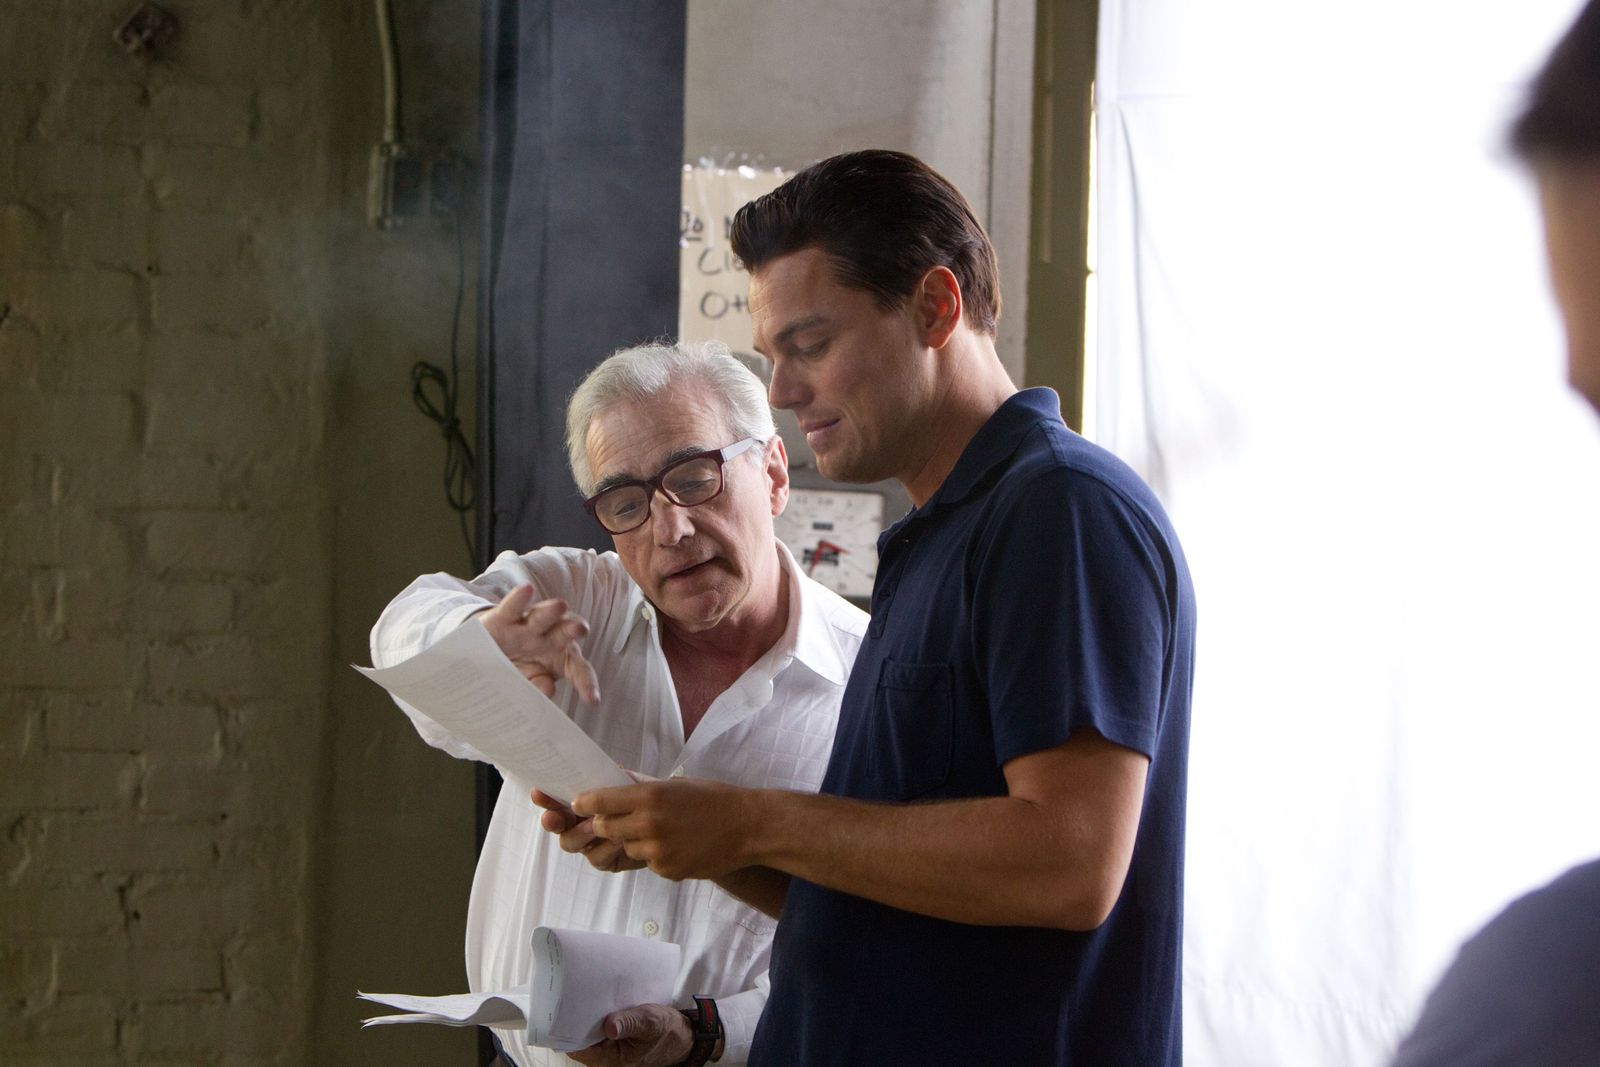 Martin Scorsese Working On Biopic Starring DiCaprio In Lead